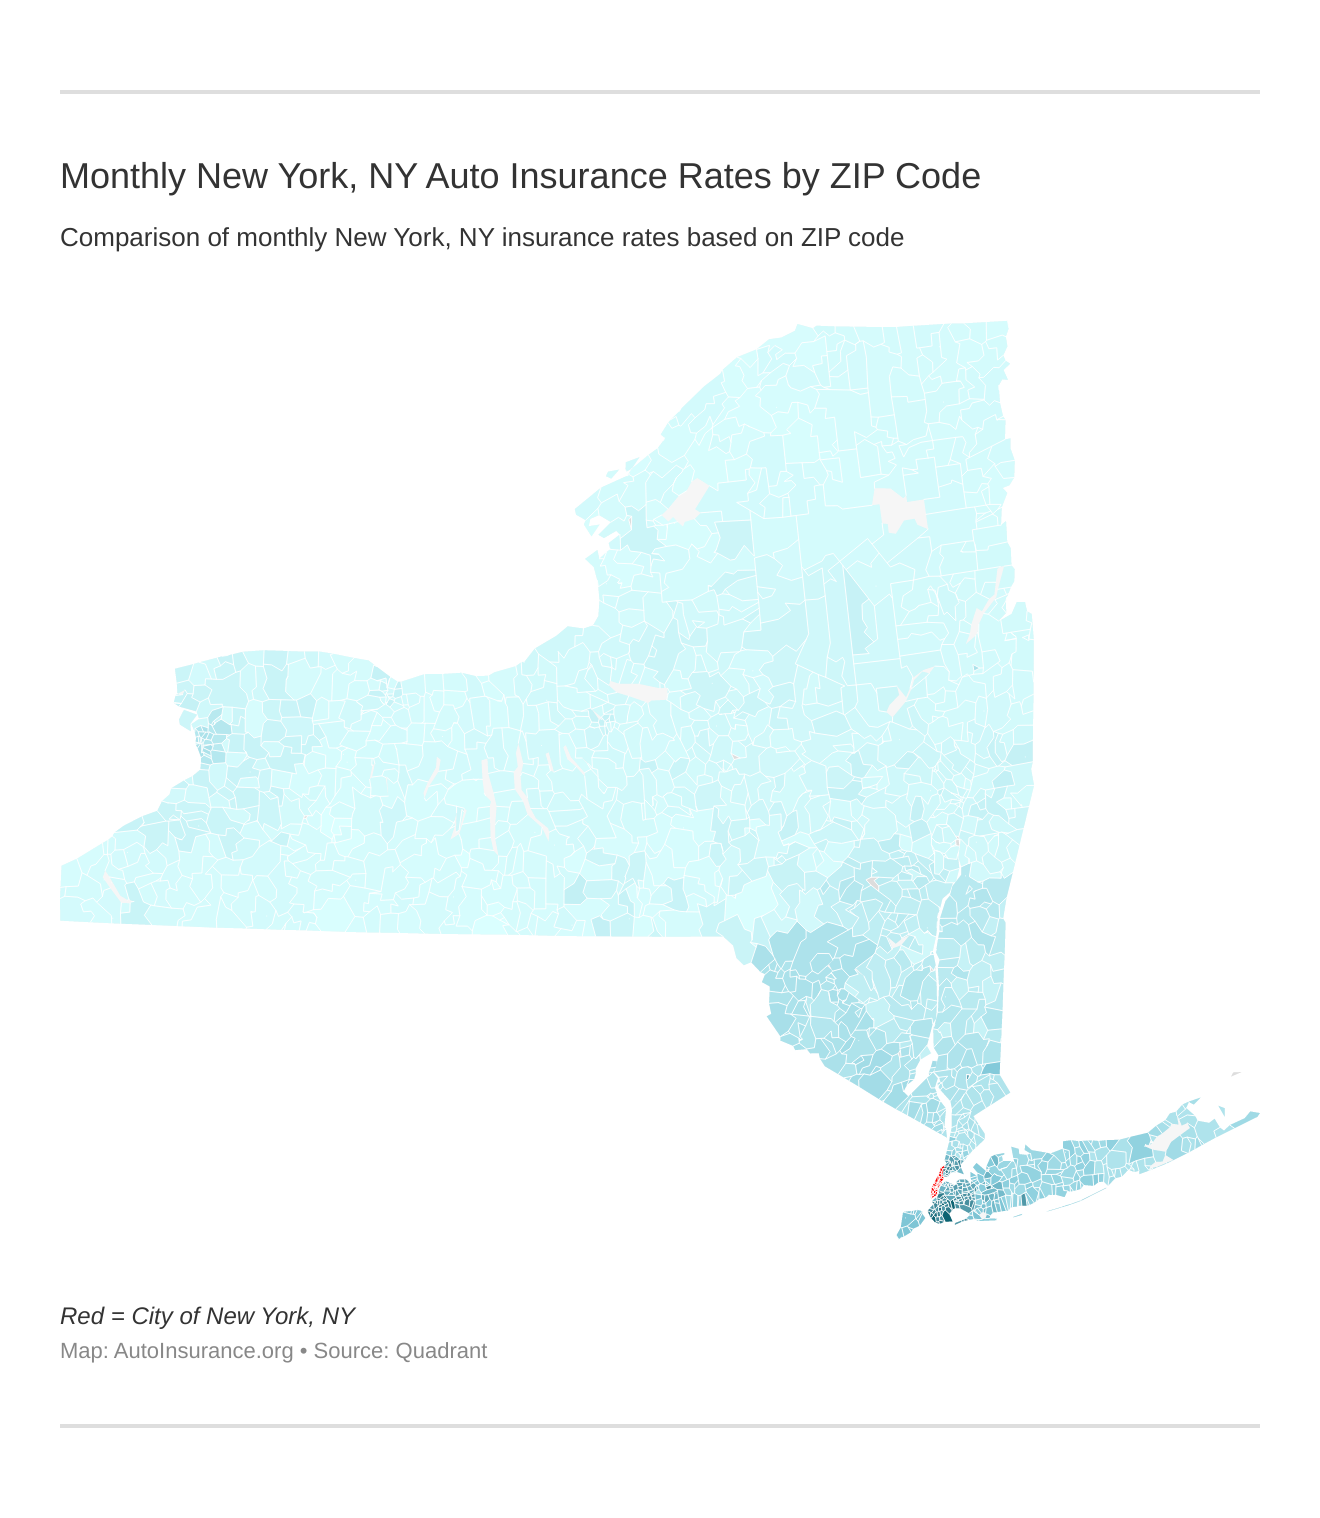 Monthly New York, NY Auto Insurance Rates by ZIP Code